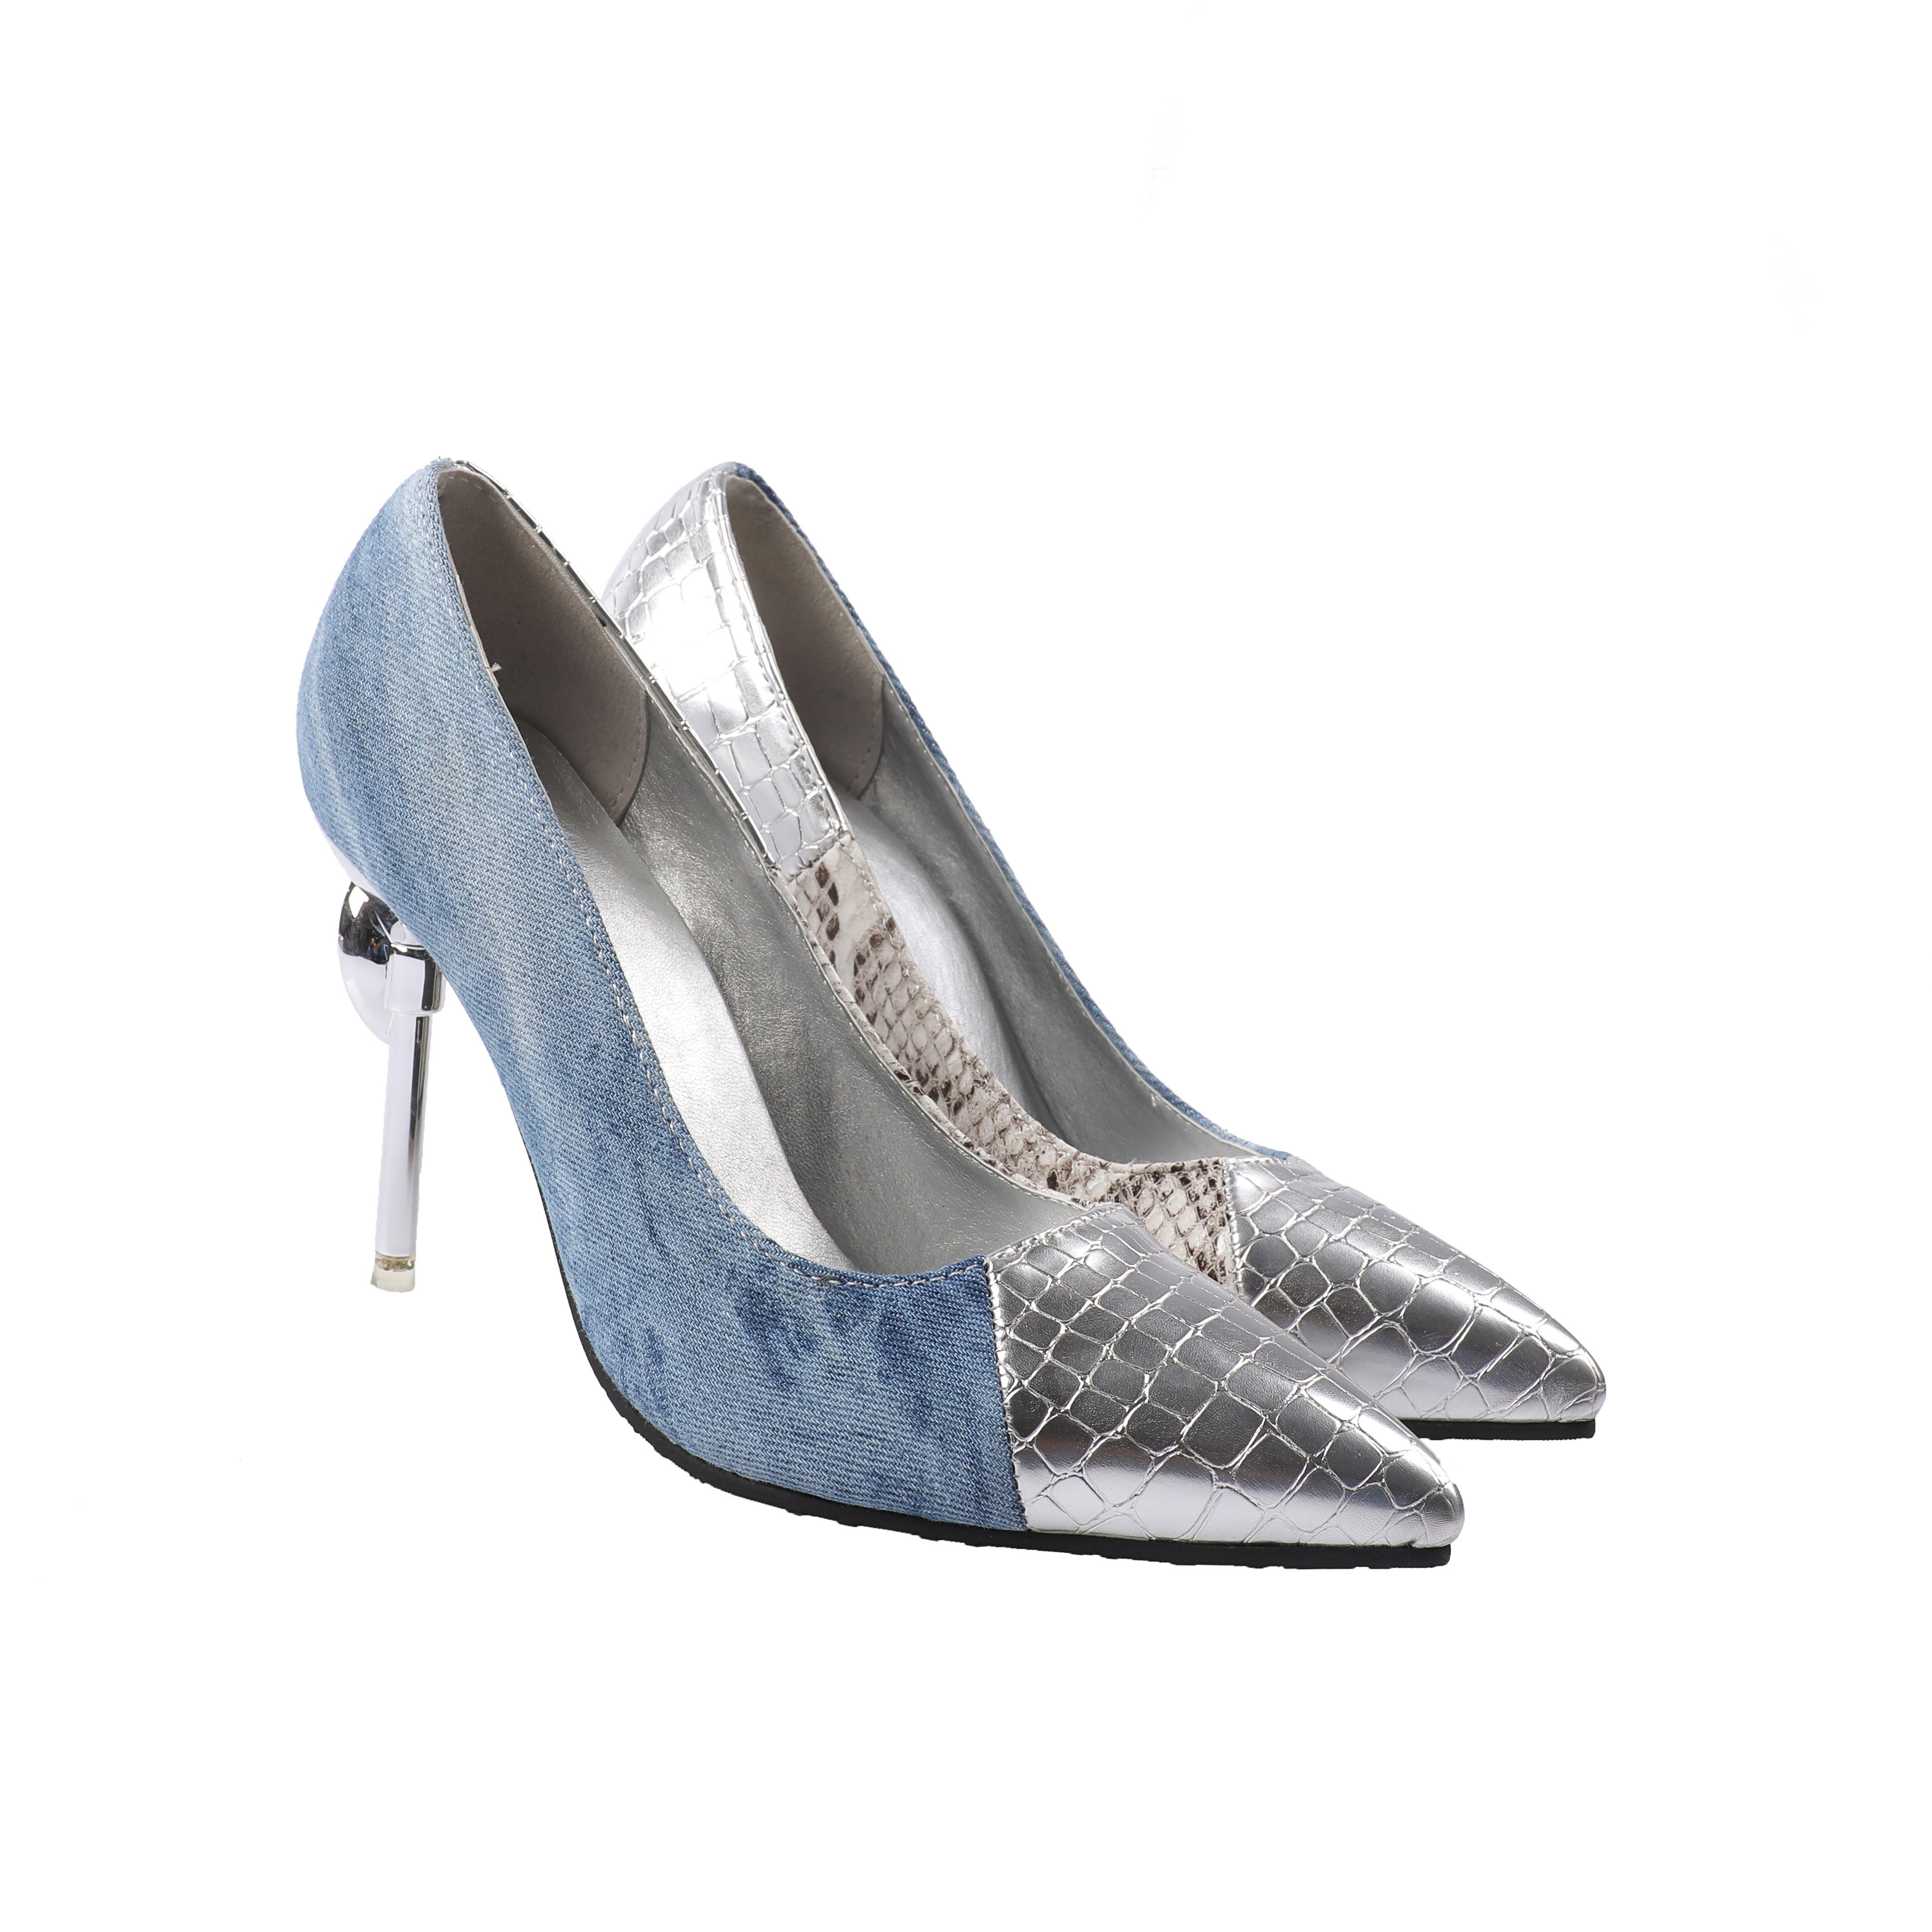 Bigsizeheels Sexy Stiletto Heel Pointed Toe Buckle Color Block Thin Shoes -Blue/Silver freeshipping - bigsizeheel®-size5-size15 -All Plus Sizes Available!